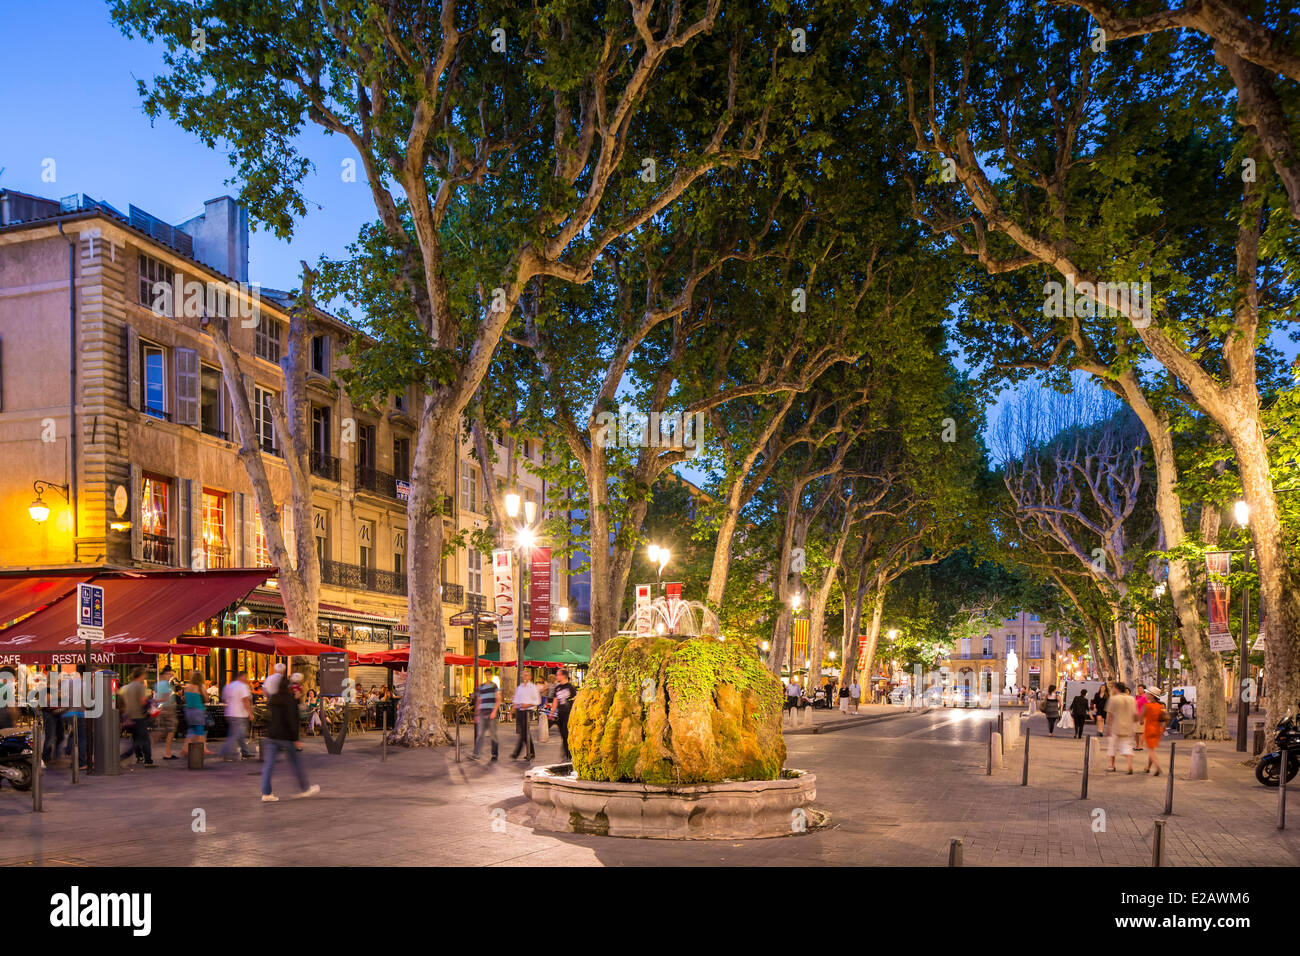 France, Bouches du Rhone, Aix en Provence, Cours Mirabeau, mossy fountain and King Rene statue Stock Photo